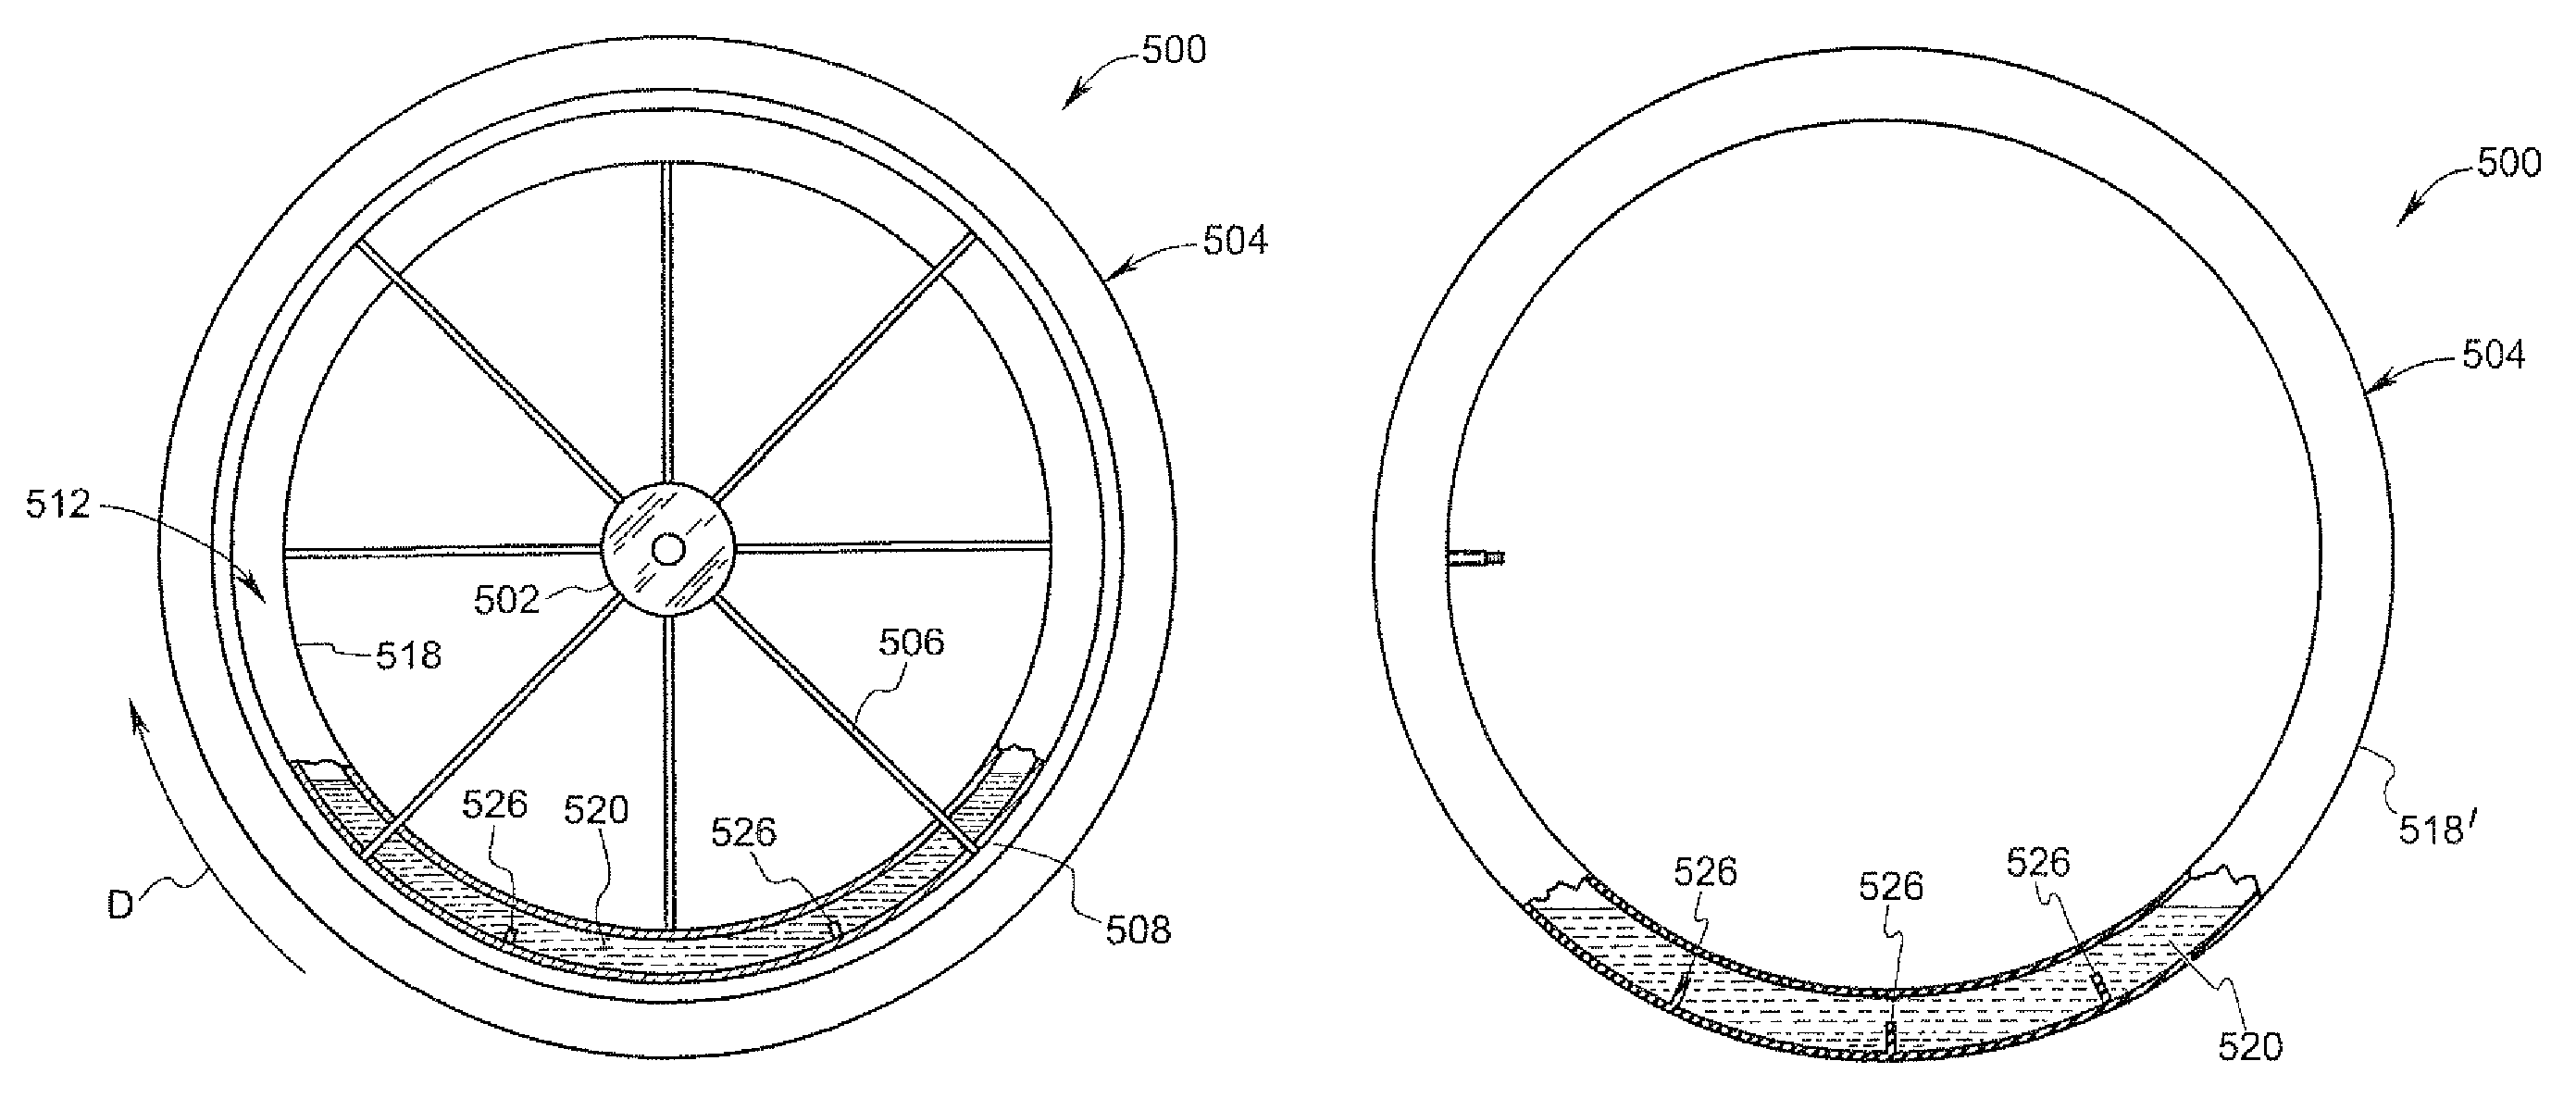 Momentum management in a wheel such as a traction wheel under a changing load